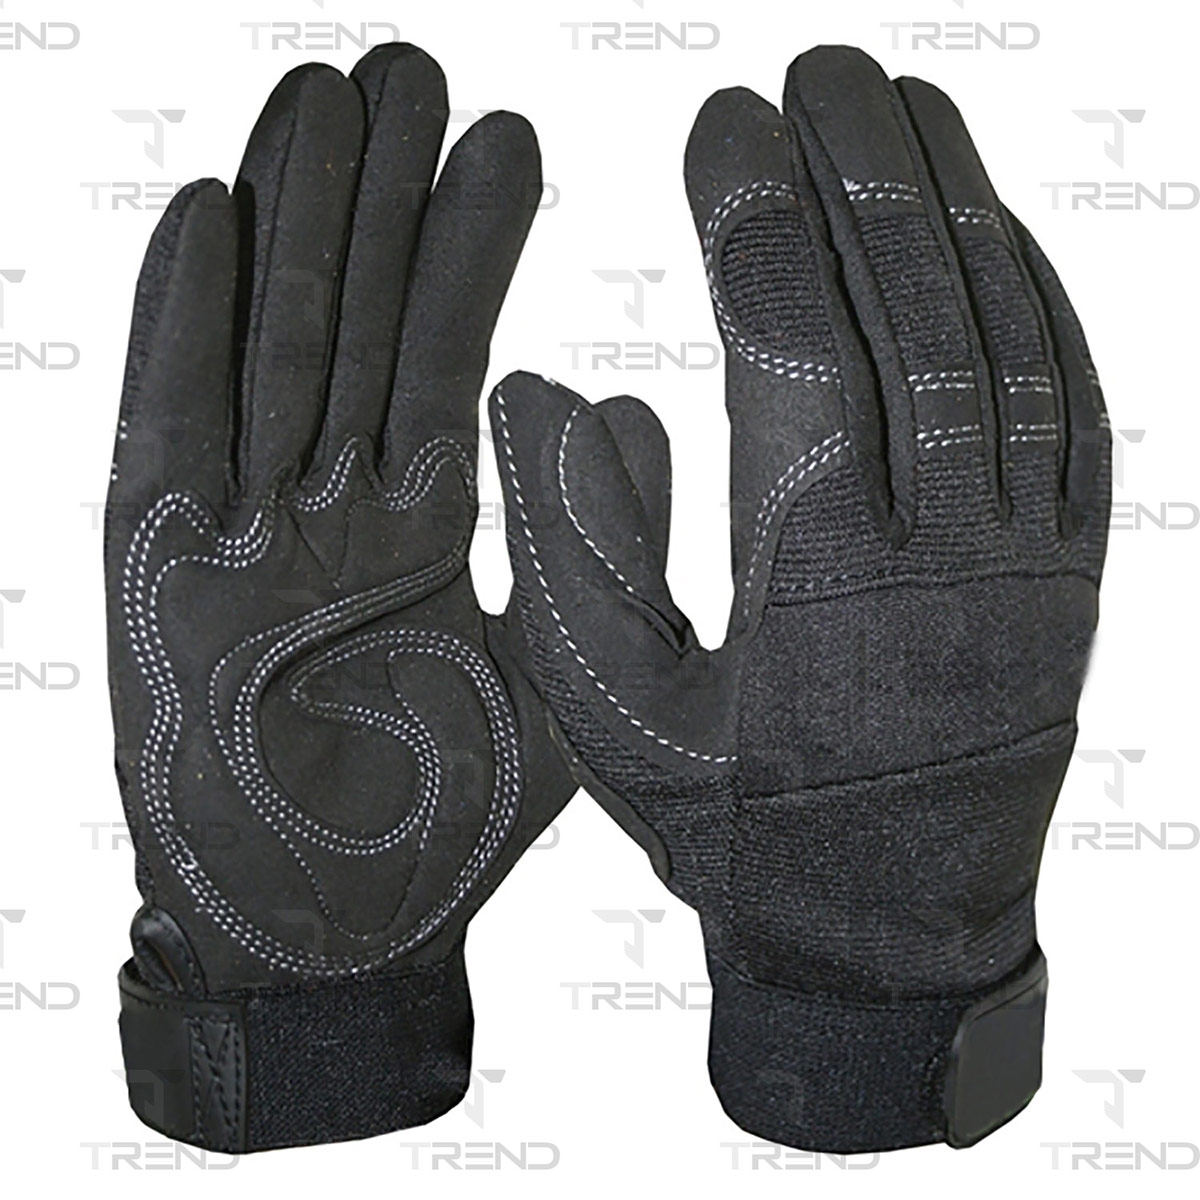 Mechanical Gloves | Trend Manufacturing